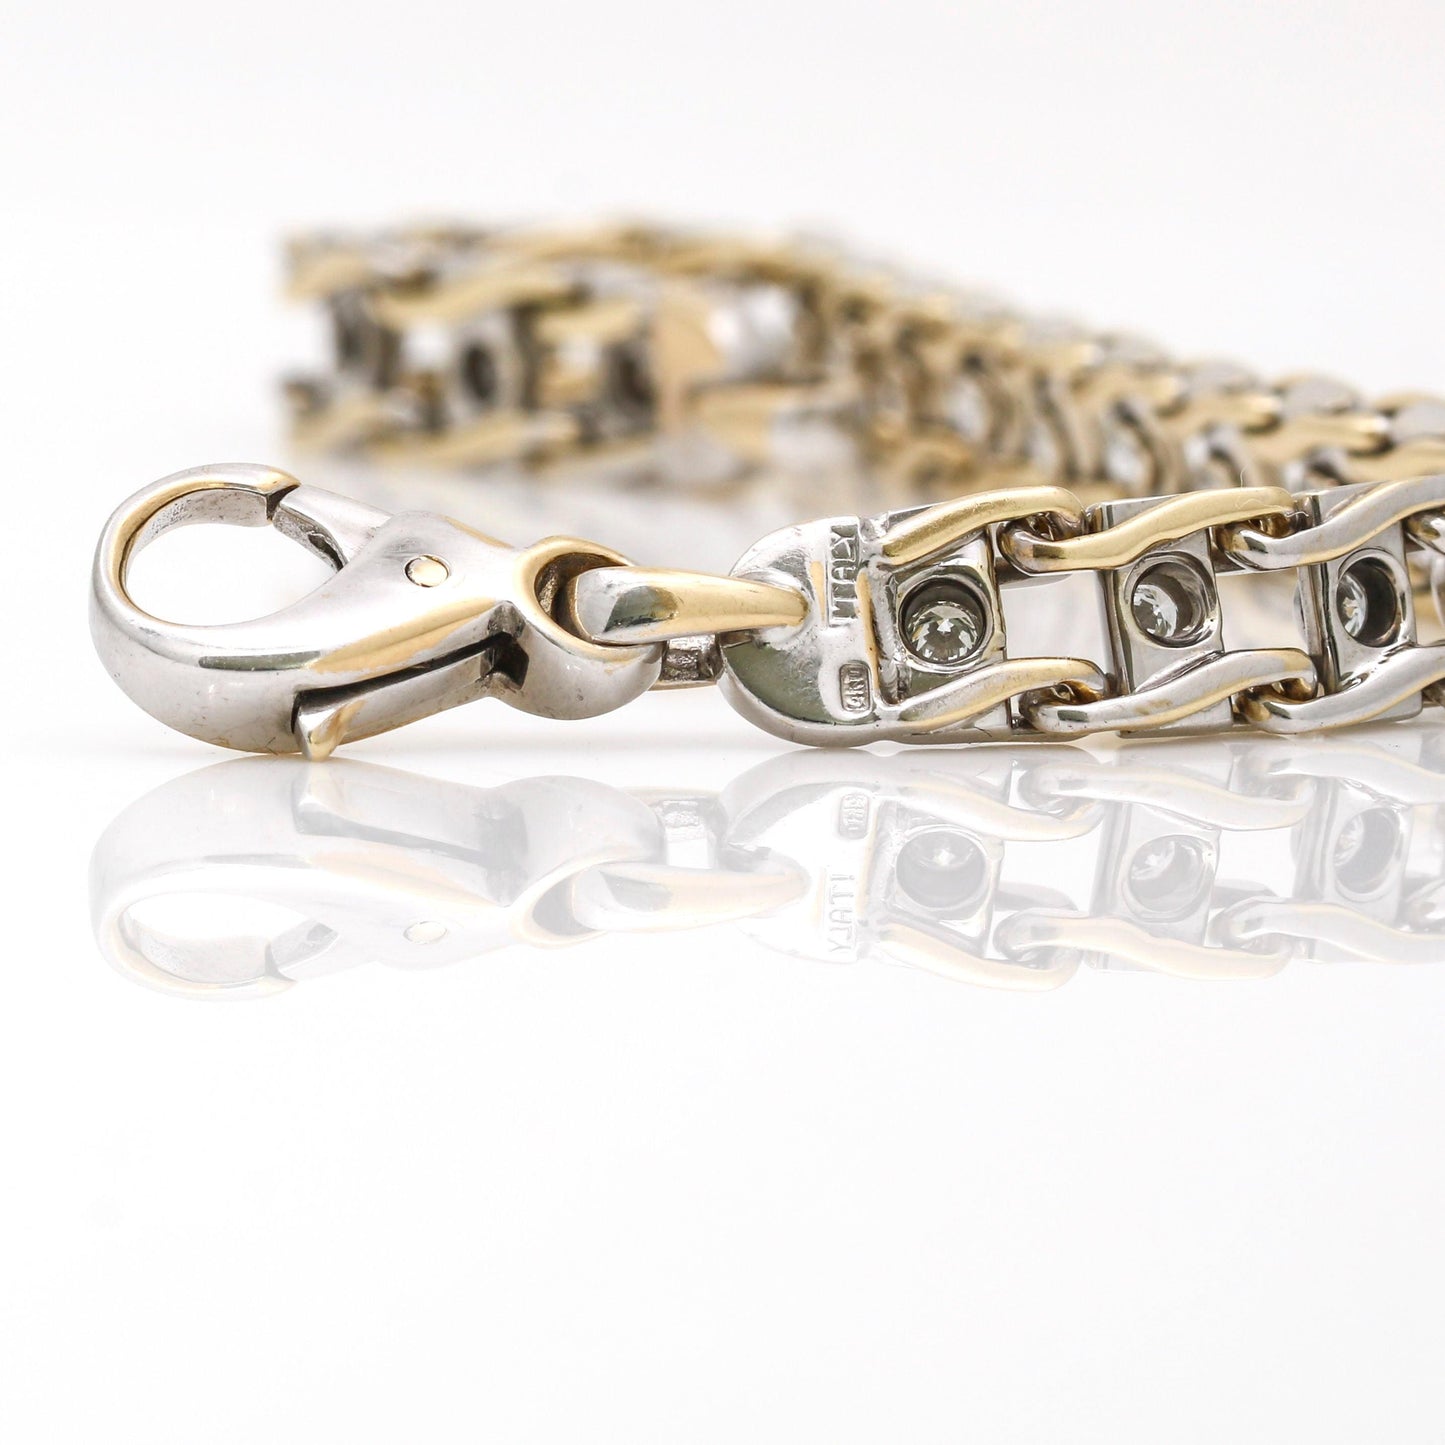 Signed Diamond Chain Link Bracelet in 14k White and Yellow Gold - 31 Jewels Inc.